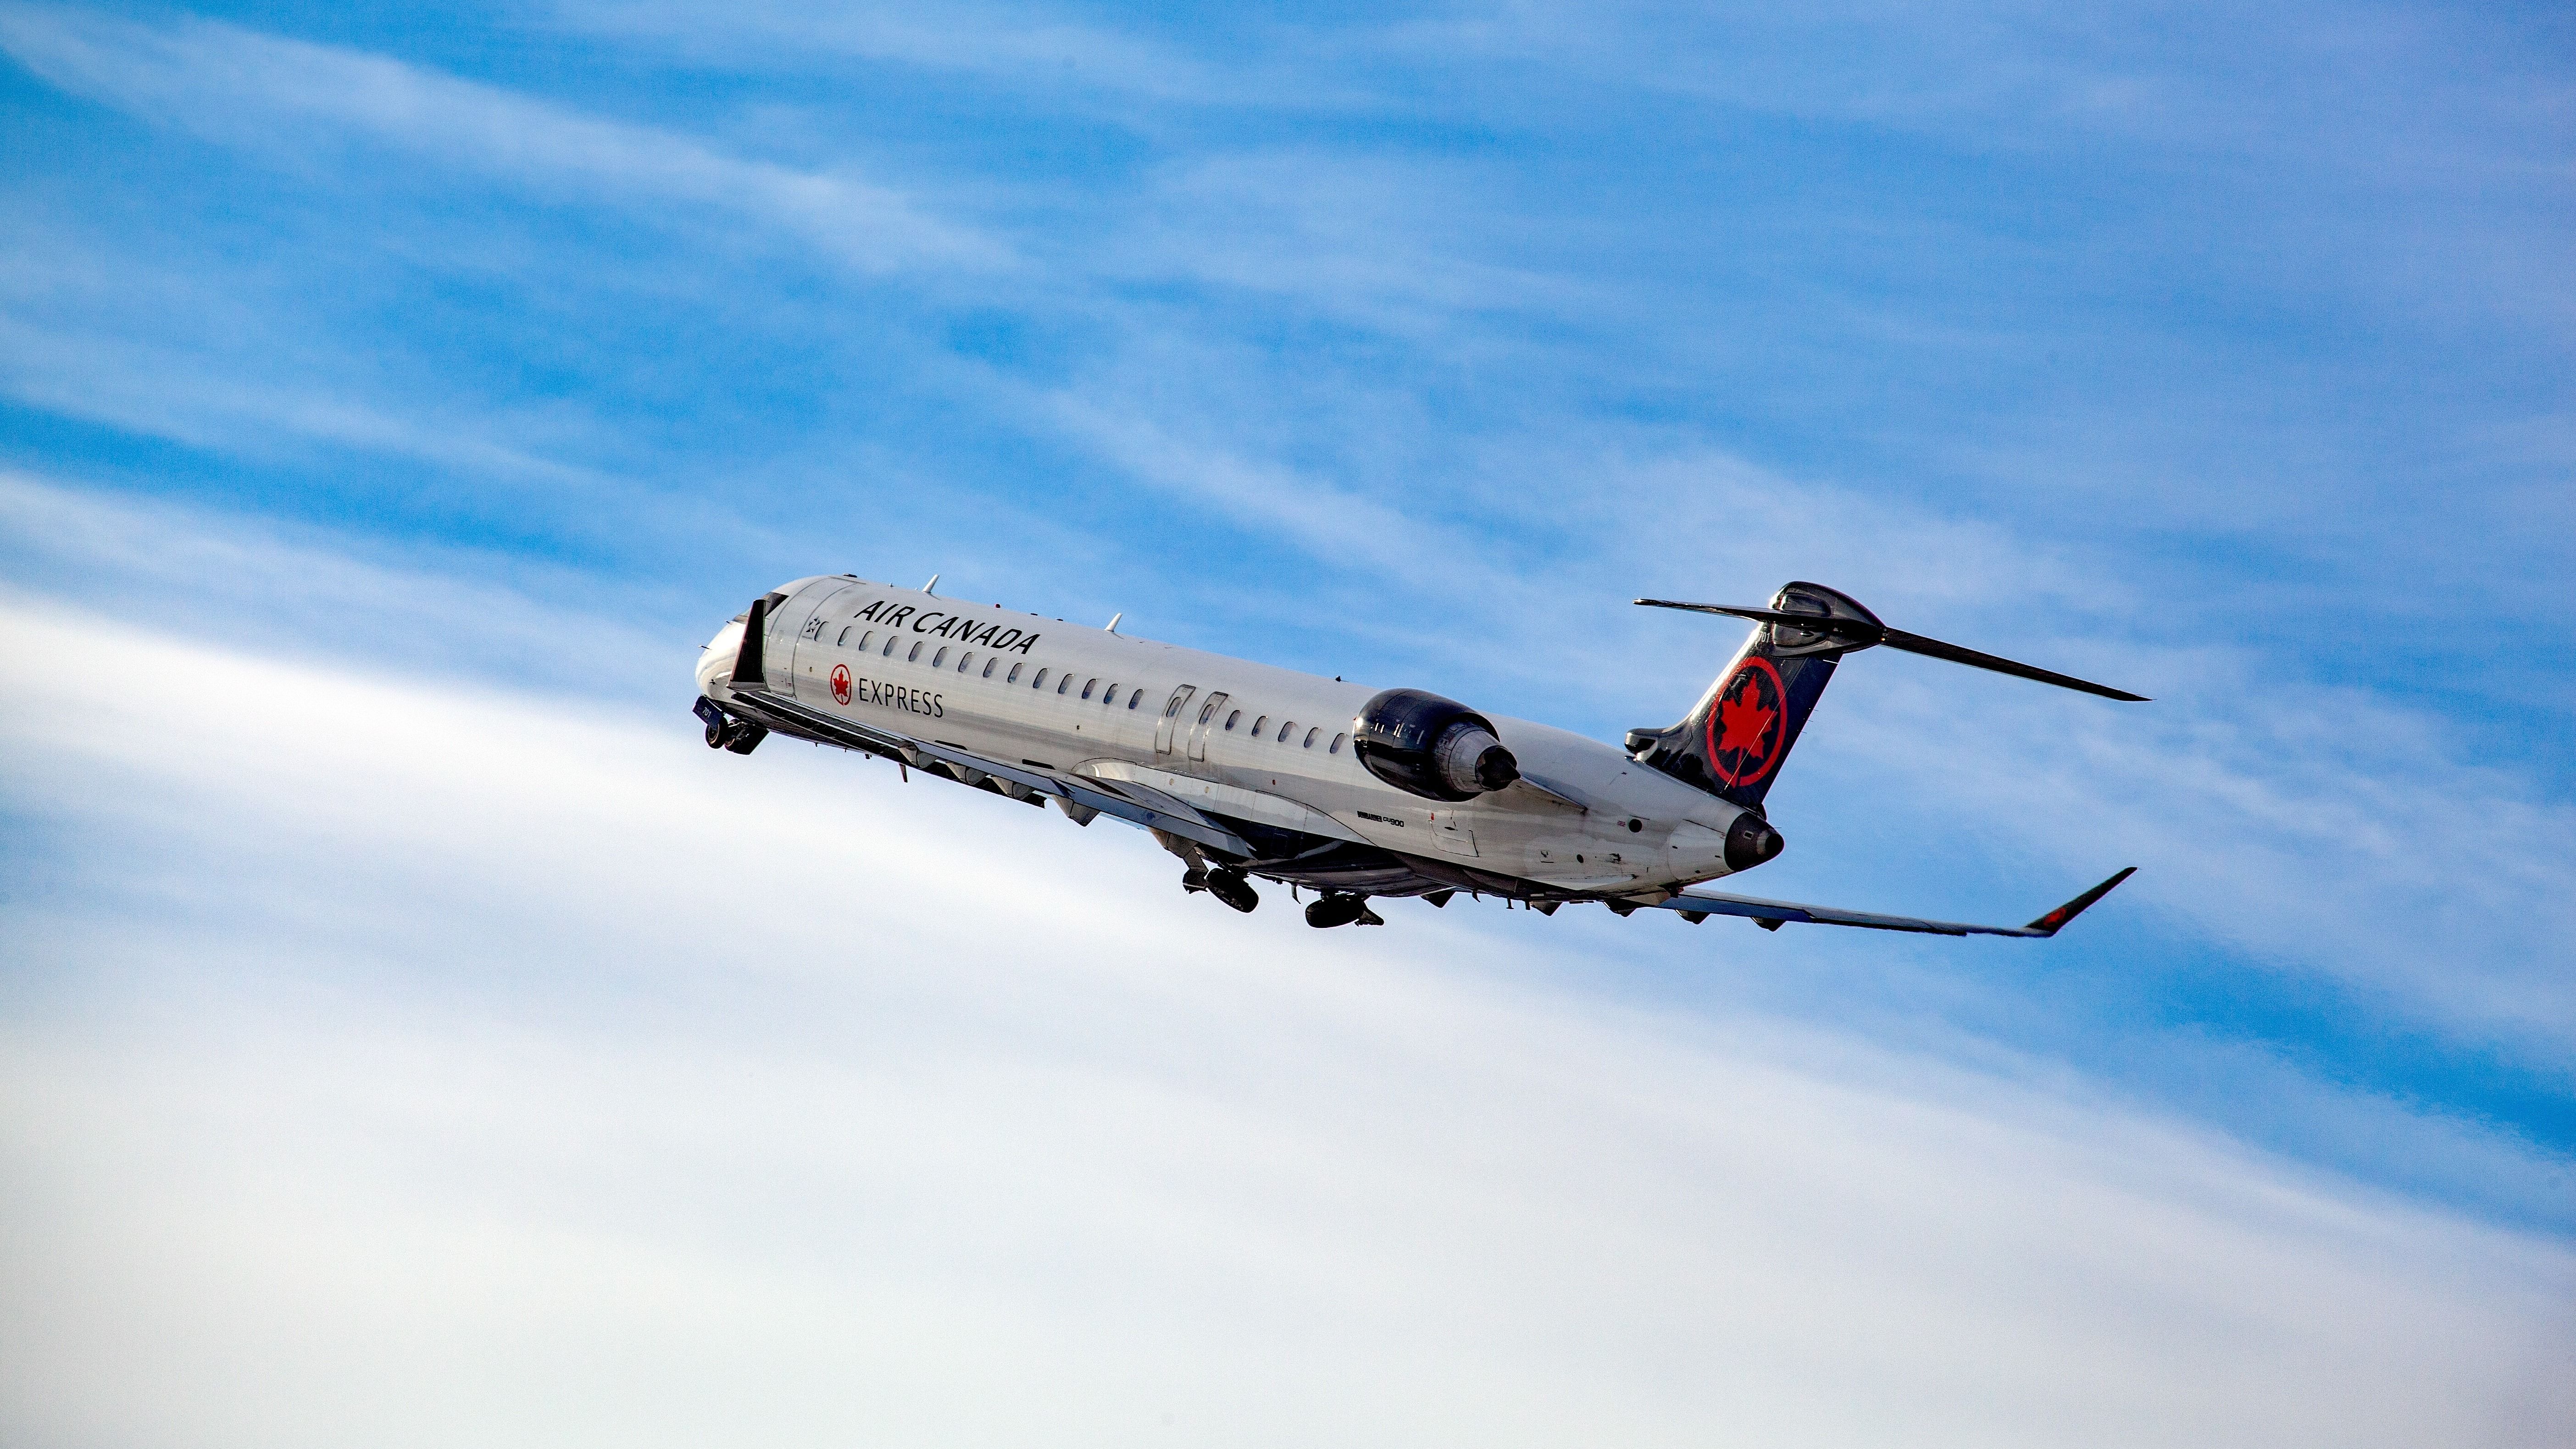 Air Canada Express Bombardier CRJ-900 ascending in the air after taking off from Montreal International Airport.